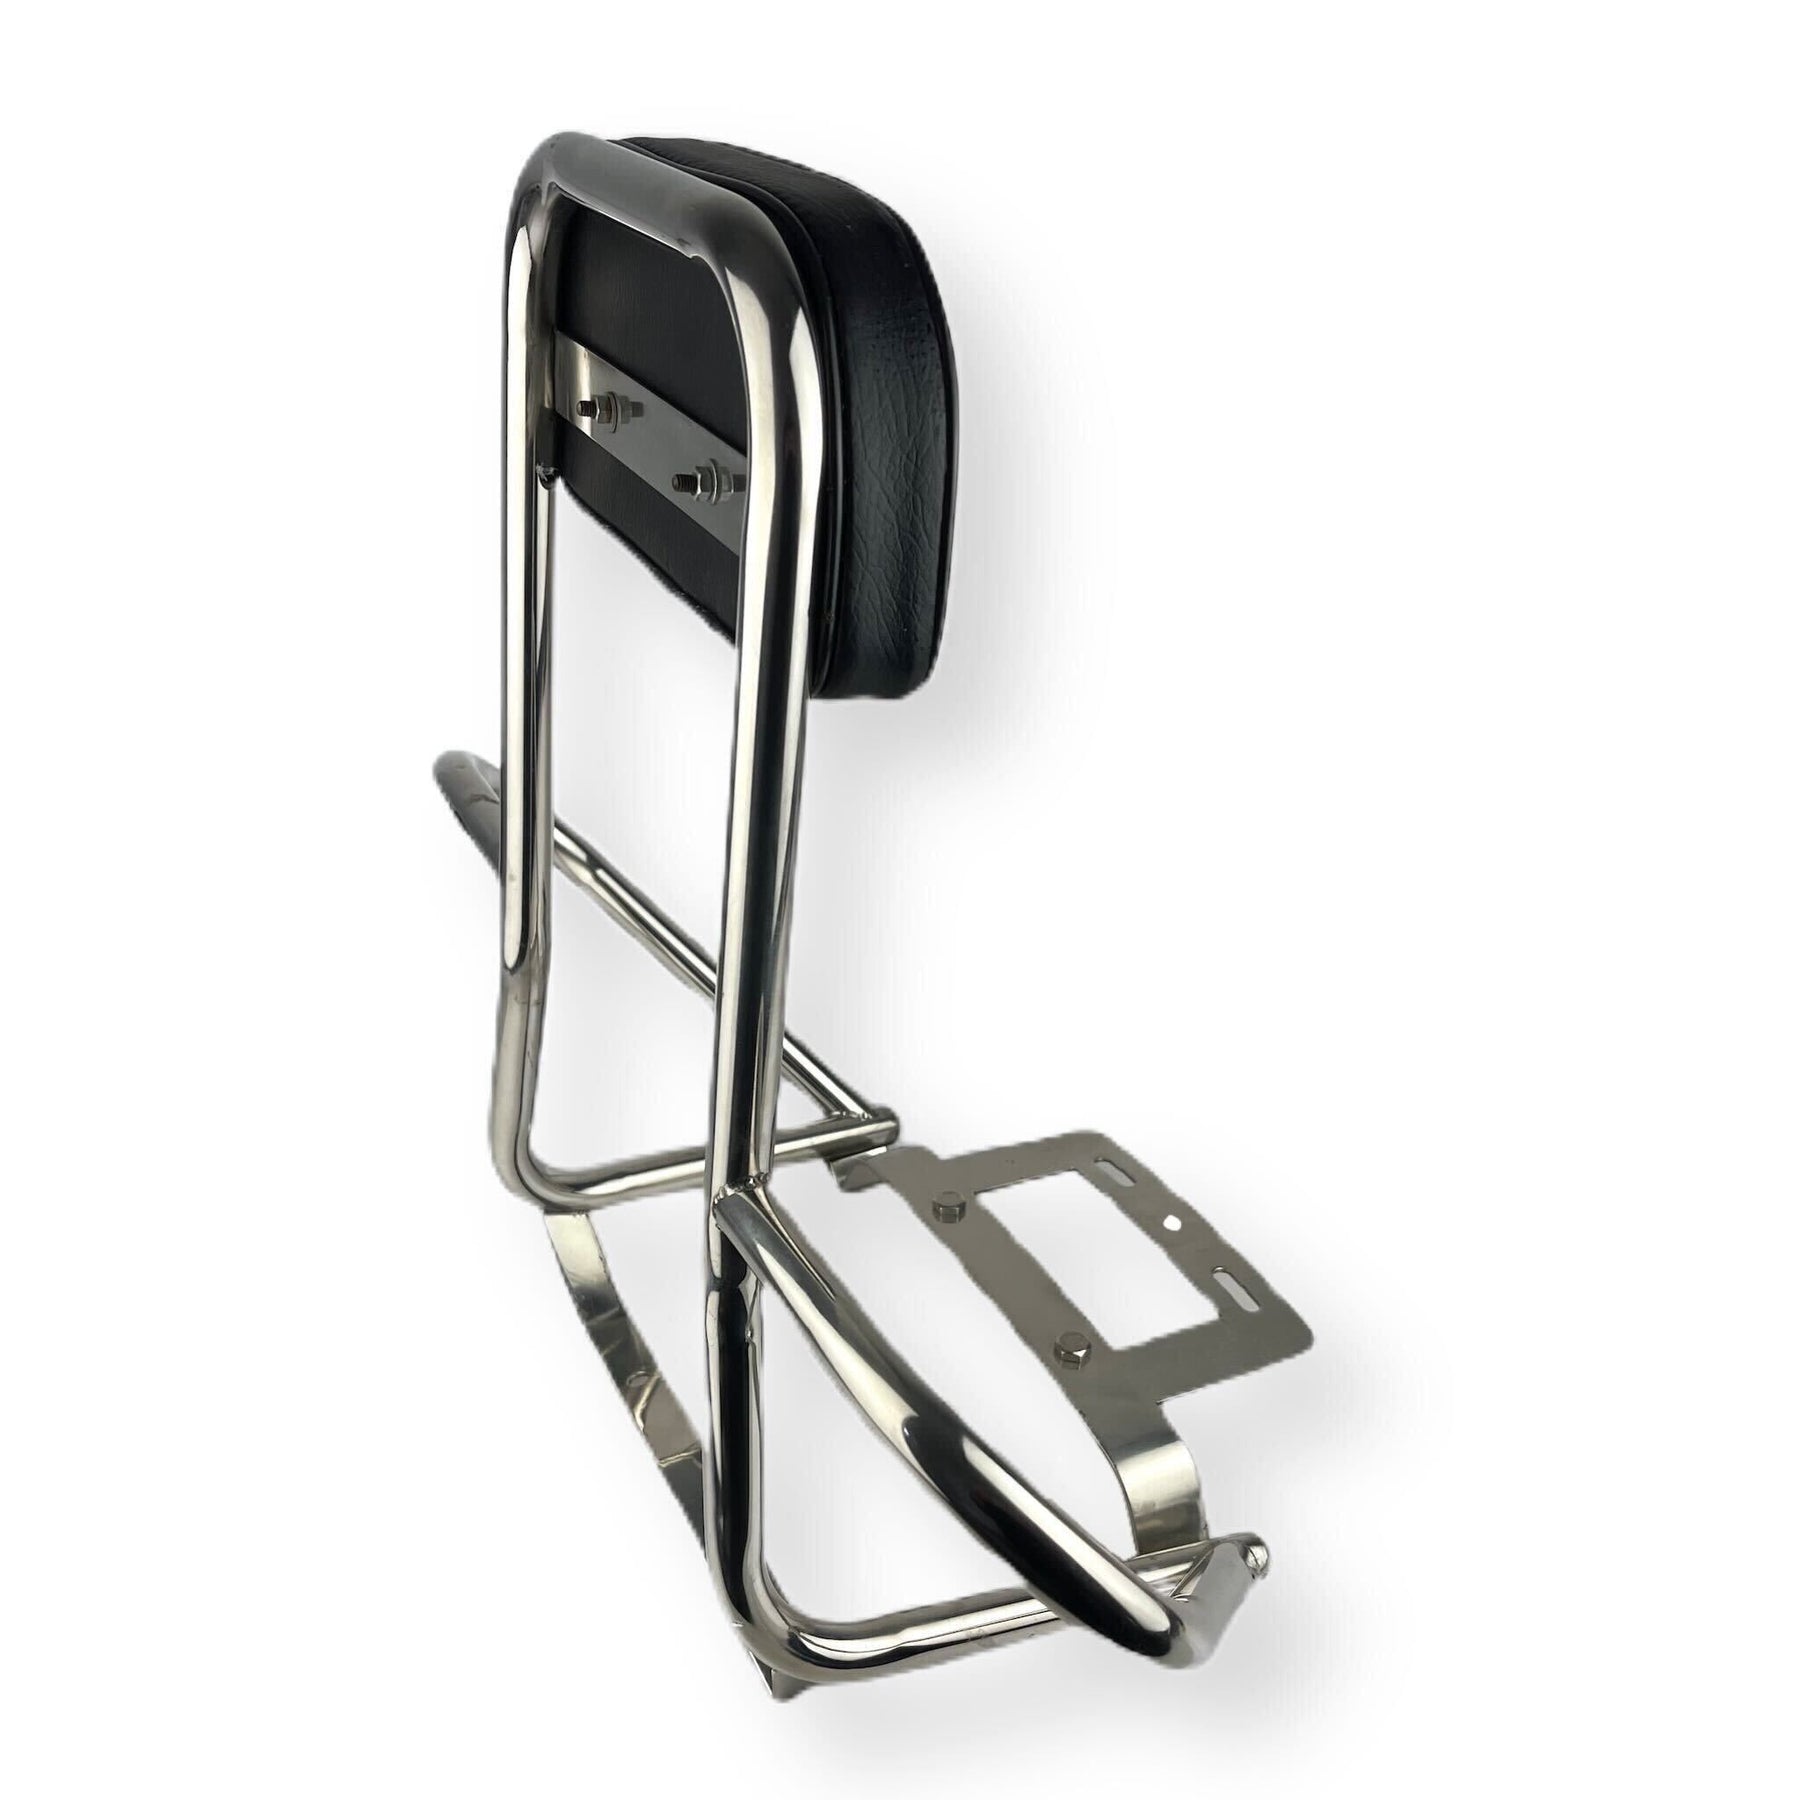 Scomadi TL/GT/GP Royal Alloy 2 in 1 Backrest - Polished Stainless Steel